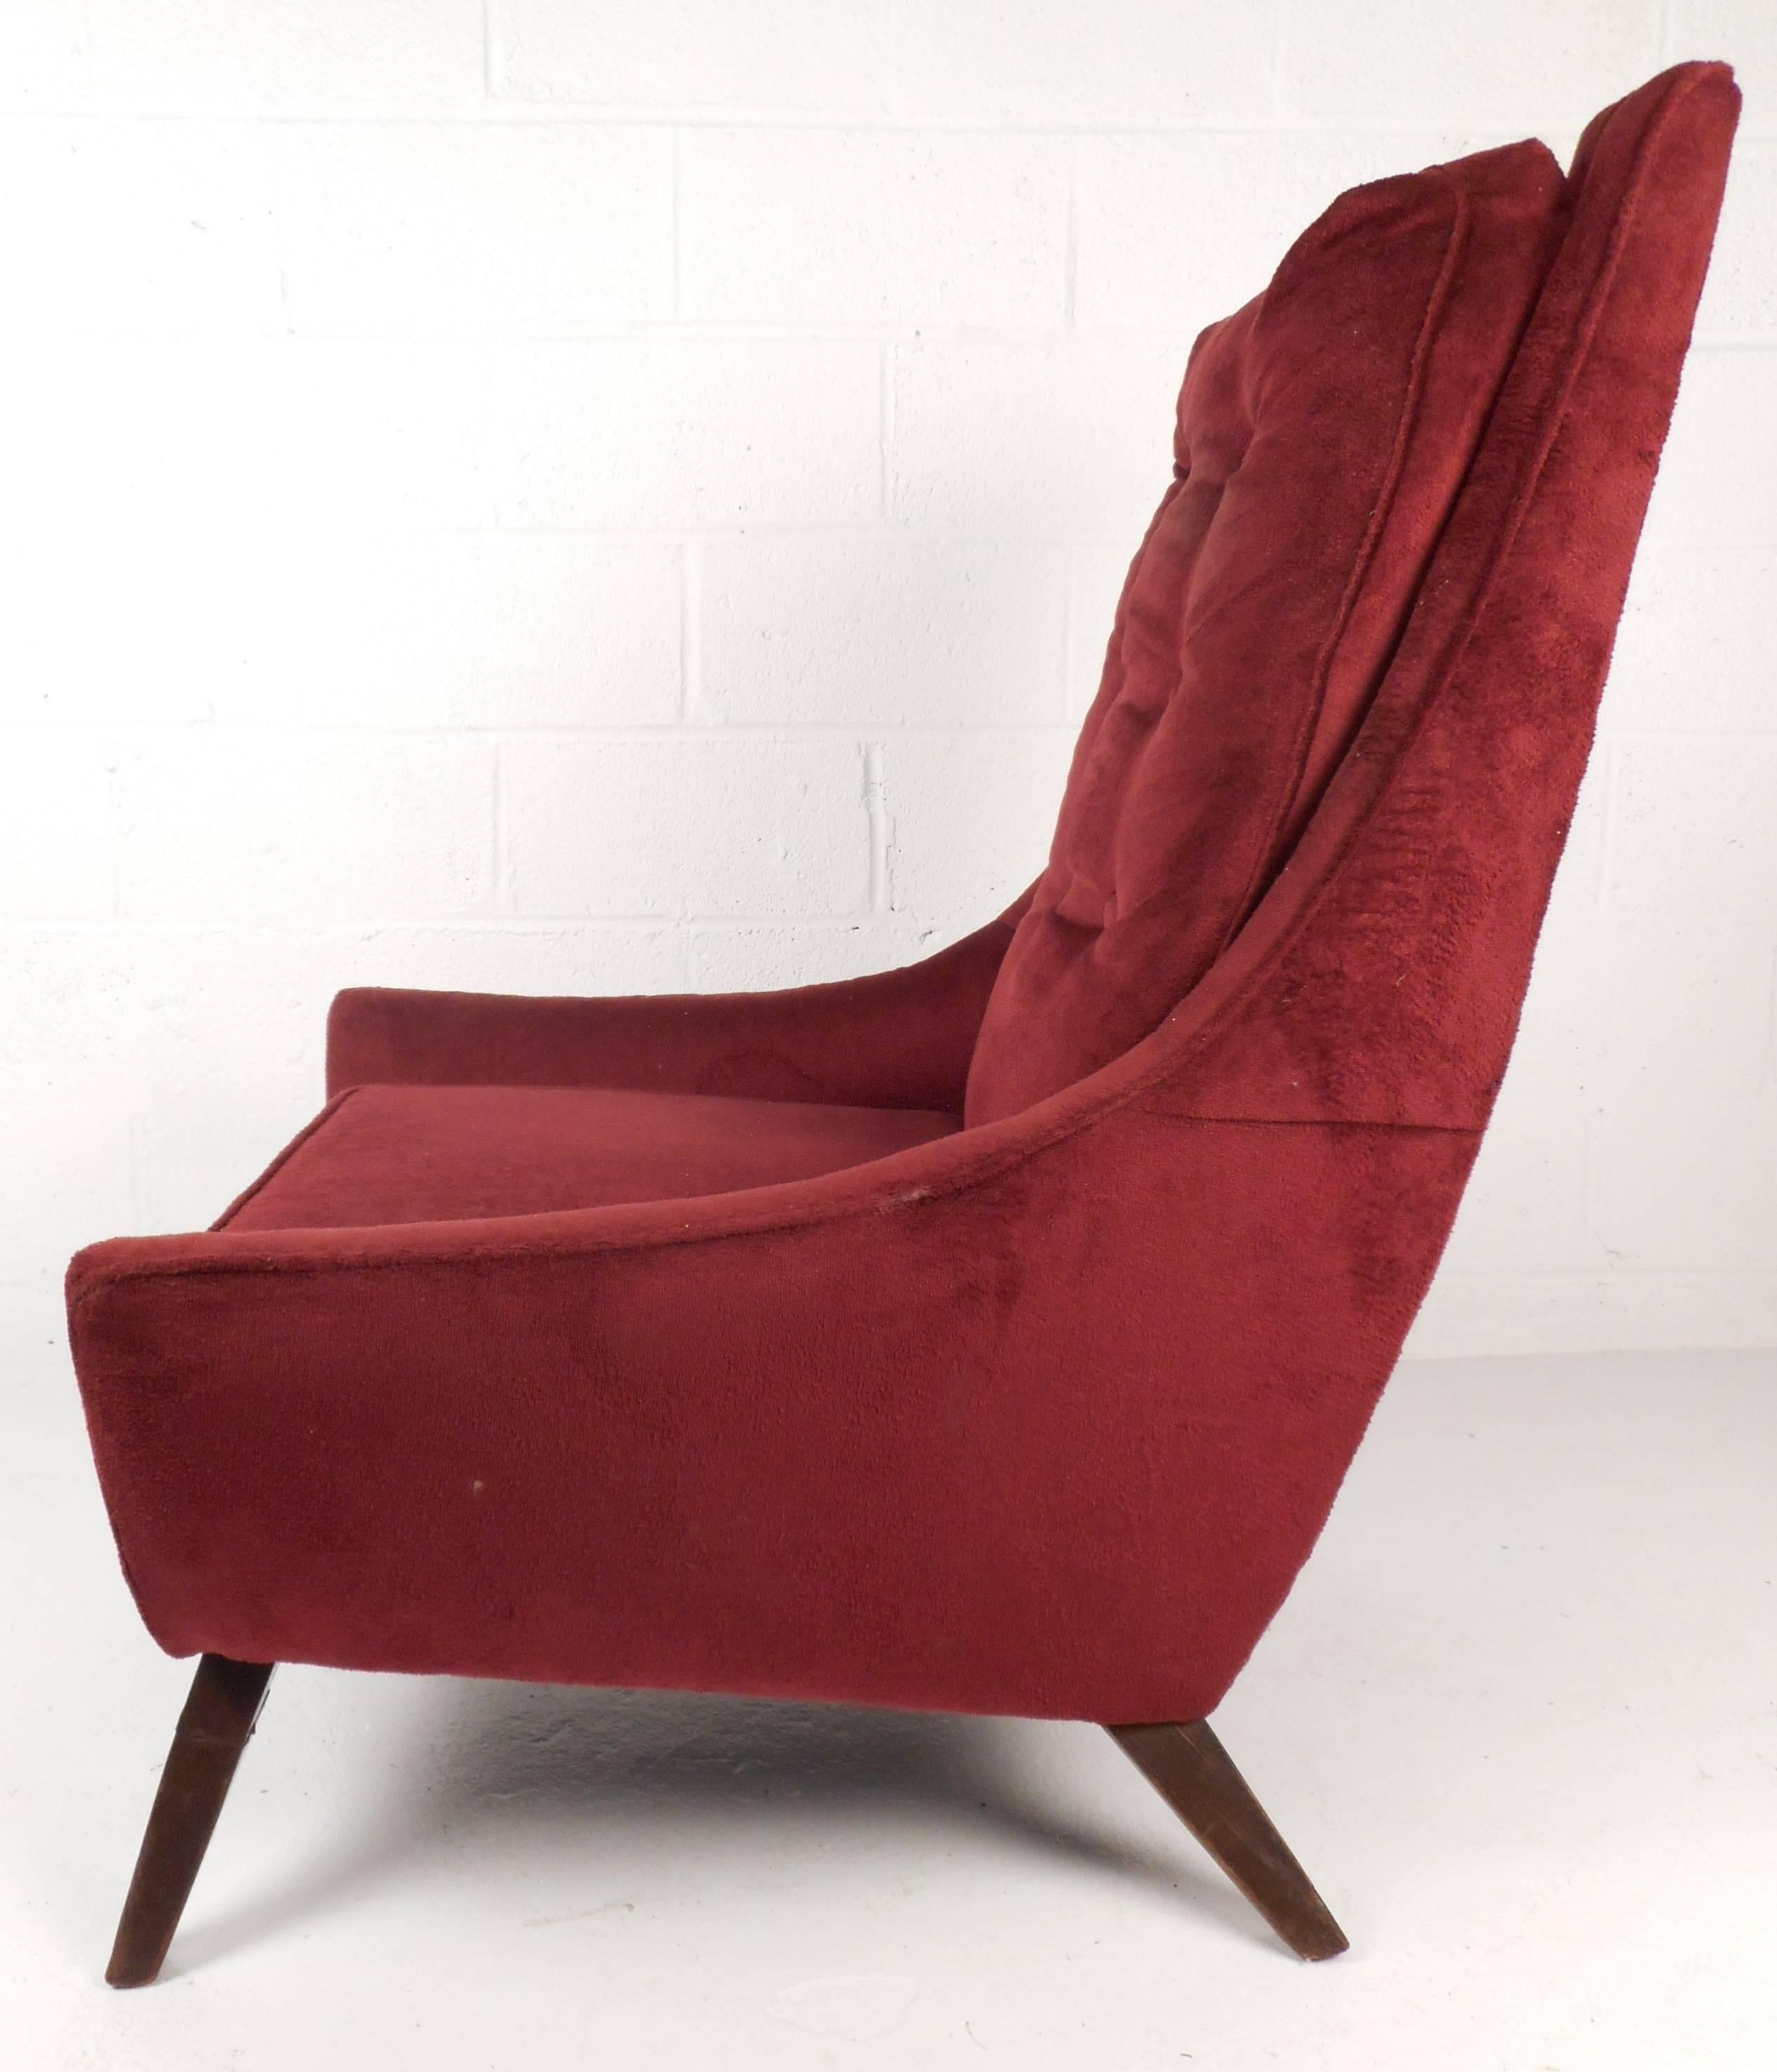 Stunning Mid-Century lounge chair features vintage crimson plush upholstery, solid sculpted walnut legs and tufted back rest. An overstuffed removable cushion and a high back rest ensure plenty of comfort. Sleek design with angled back legs adds